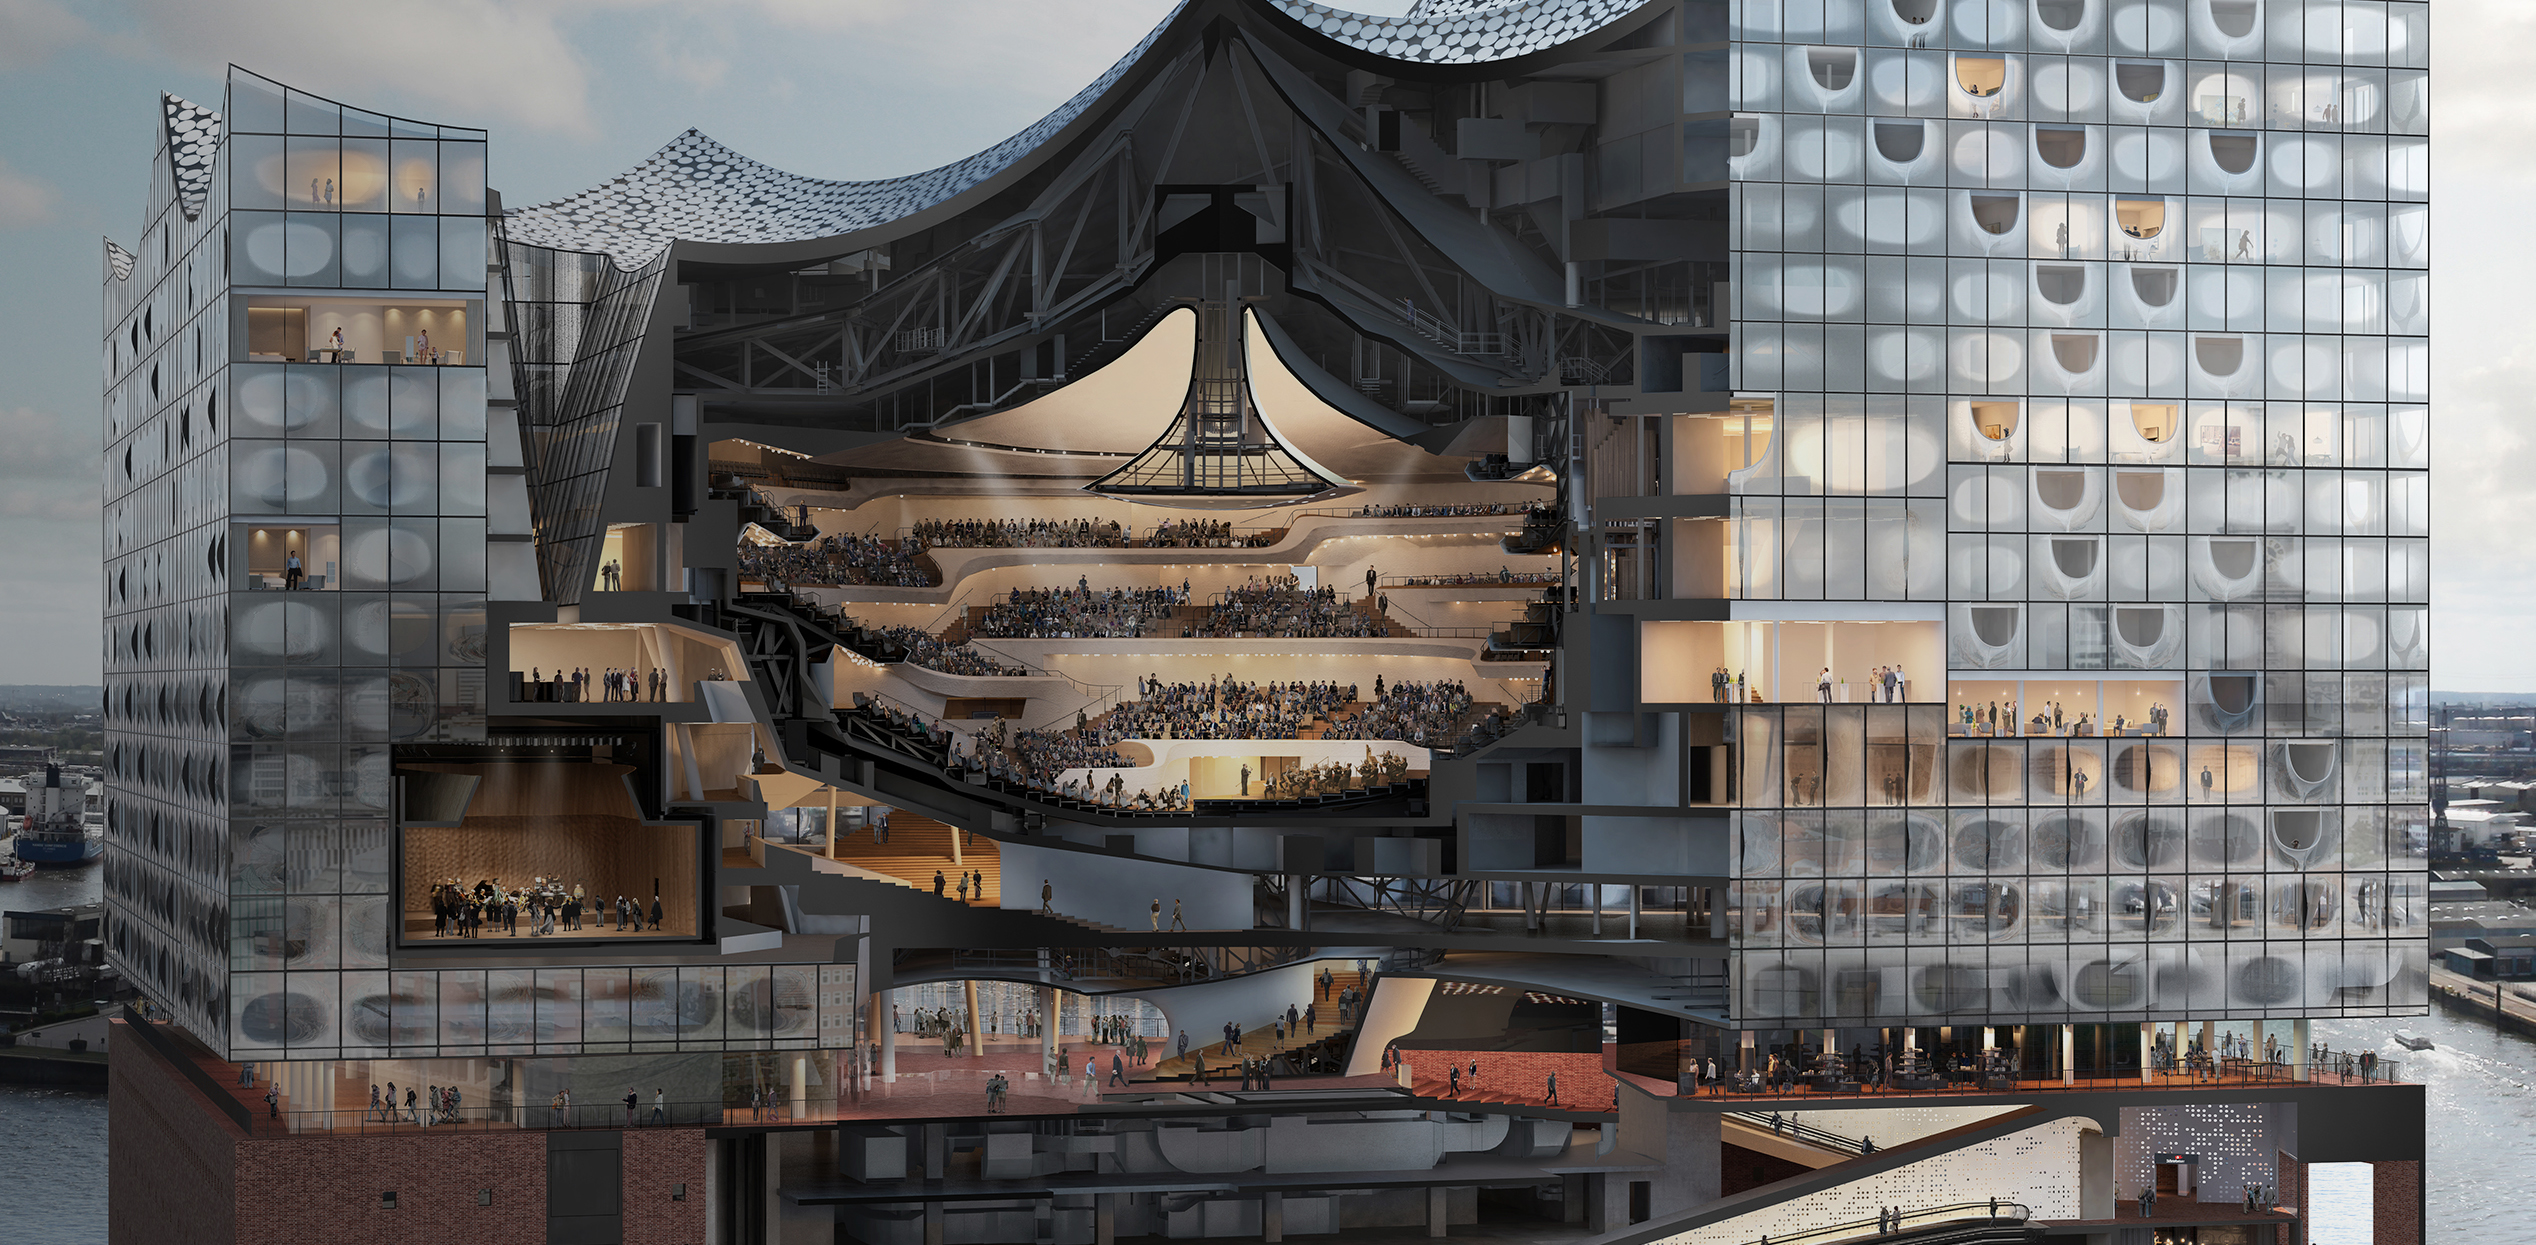 Architectural Drawings: 10 Cultural Landmarks in Section - Architizer